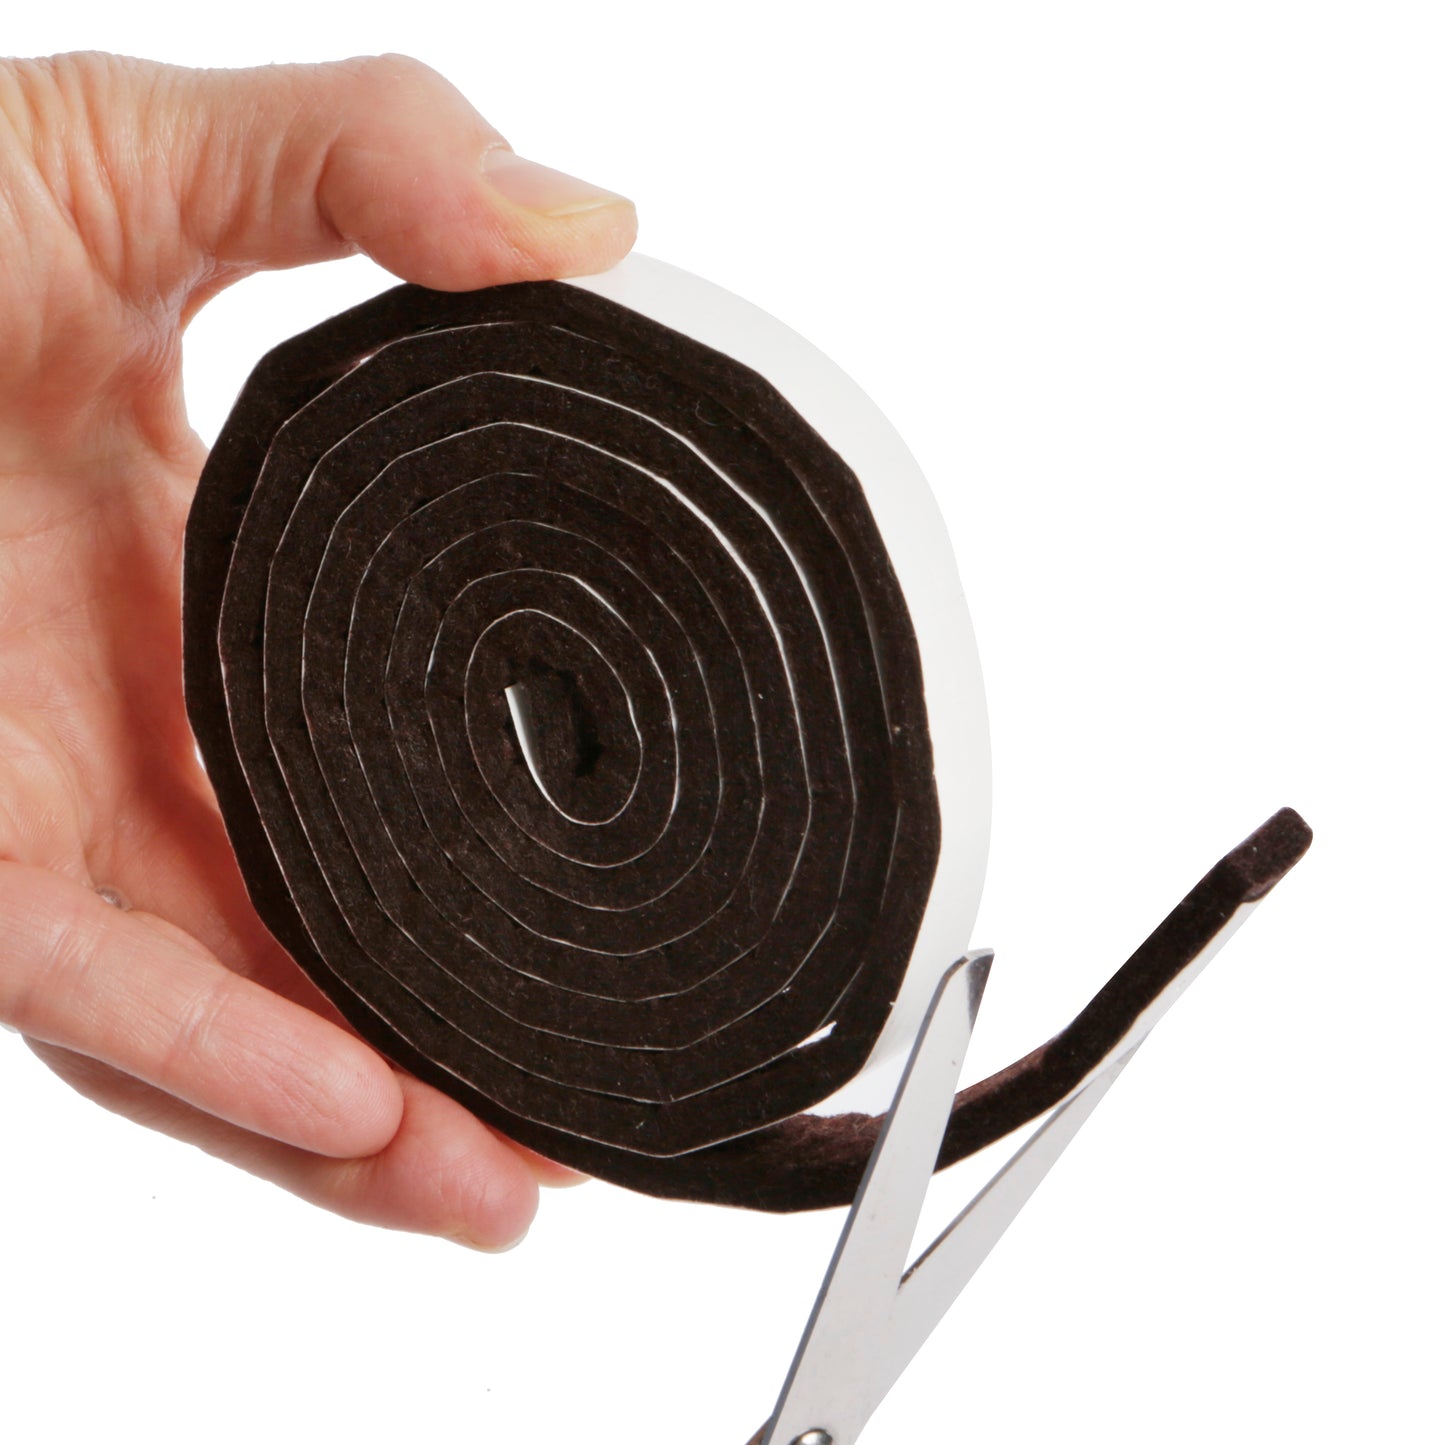 Brown felt strip roll. Can be cut easily to desired length using sharp scissors.